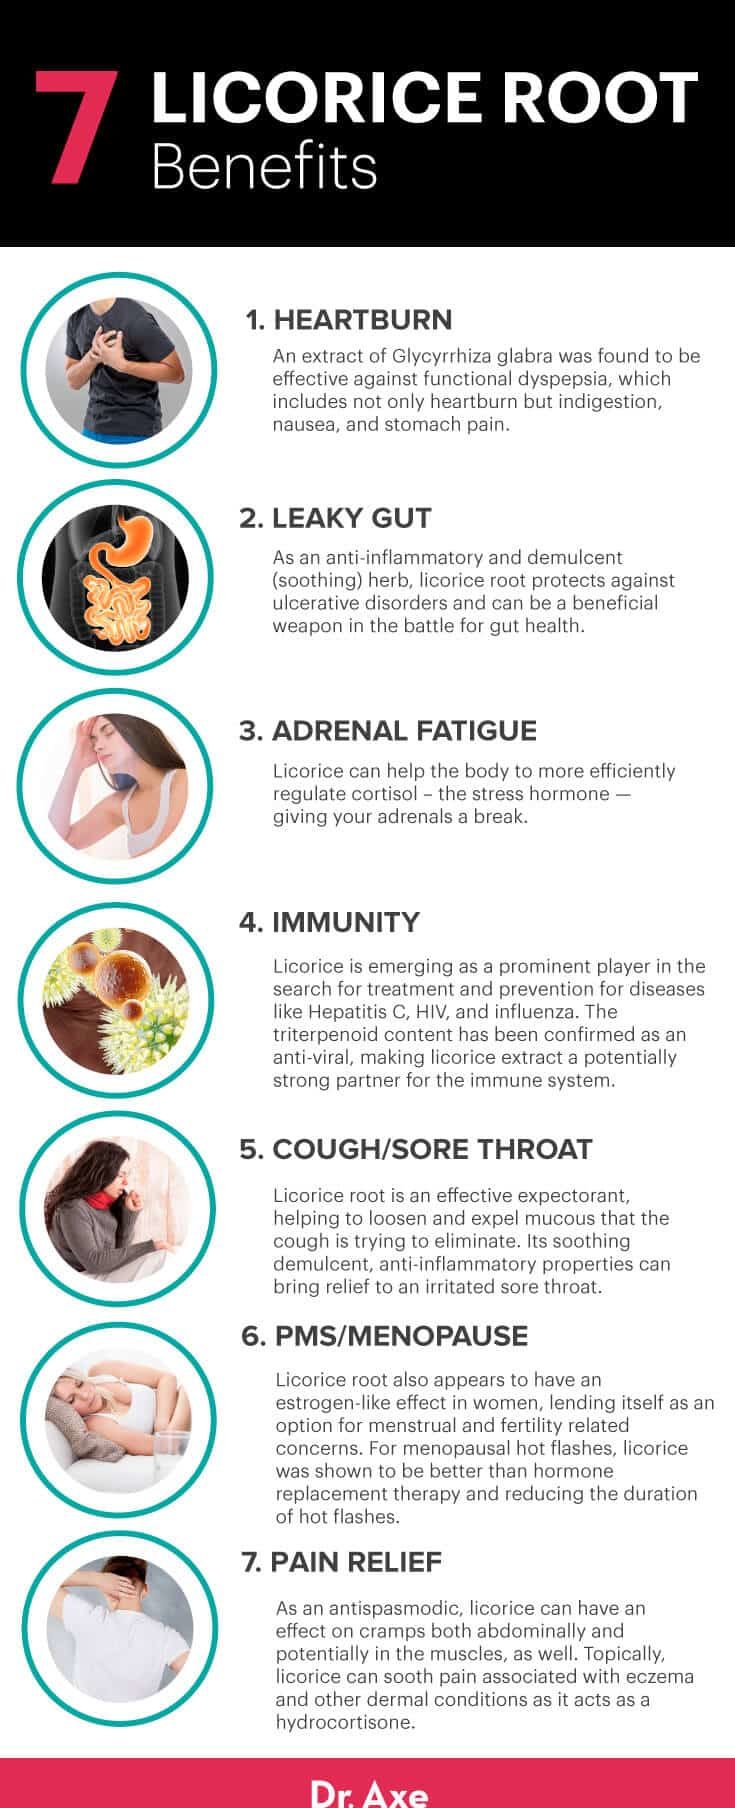 Licorice root benefits - Dr. Axe